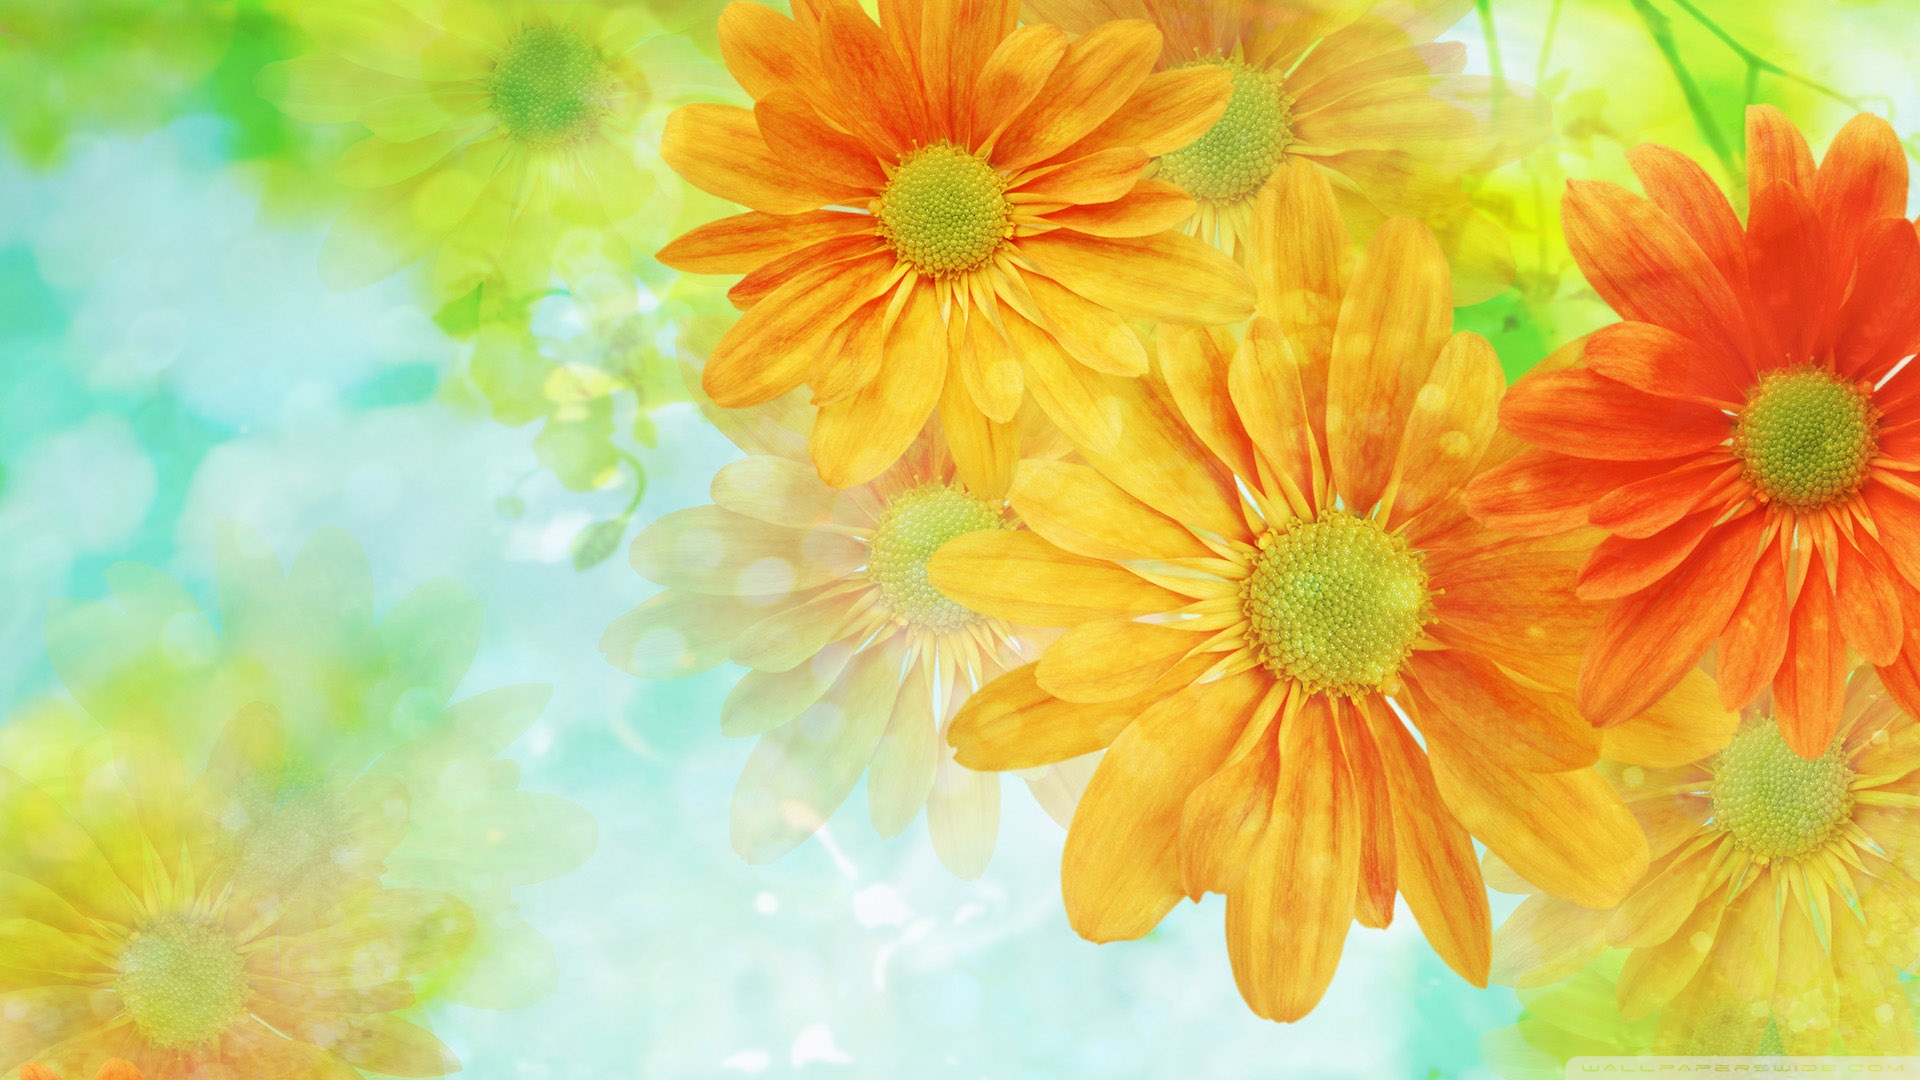 Colorful Flowers Wallpaper 1920x1080 Colorful Flowers